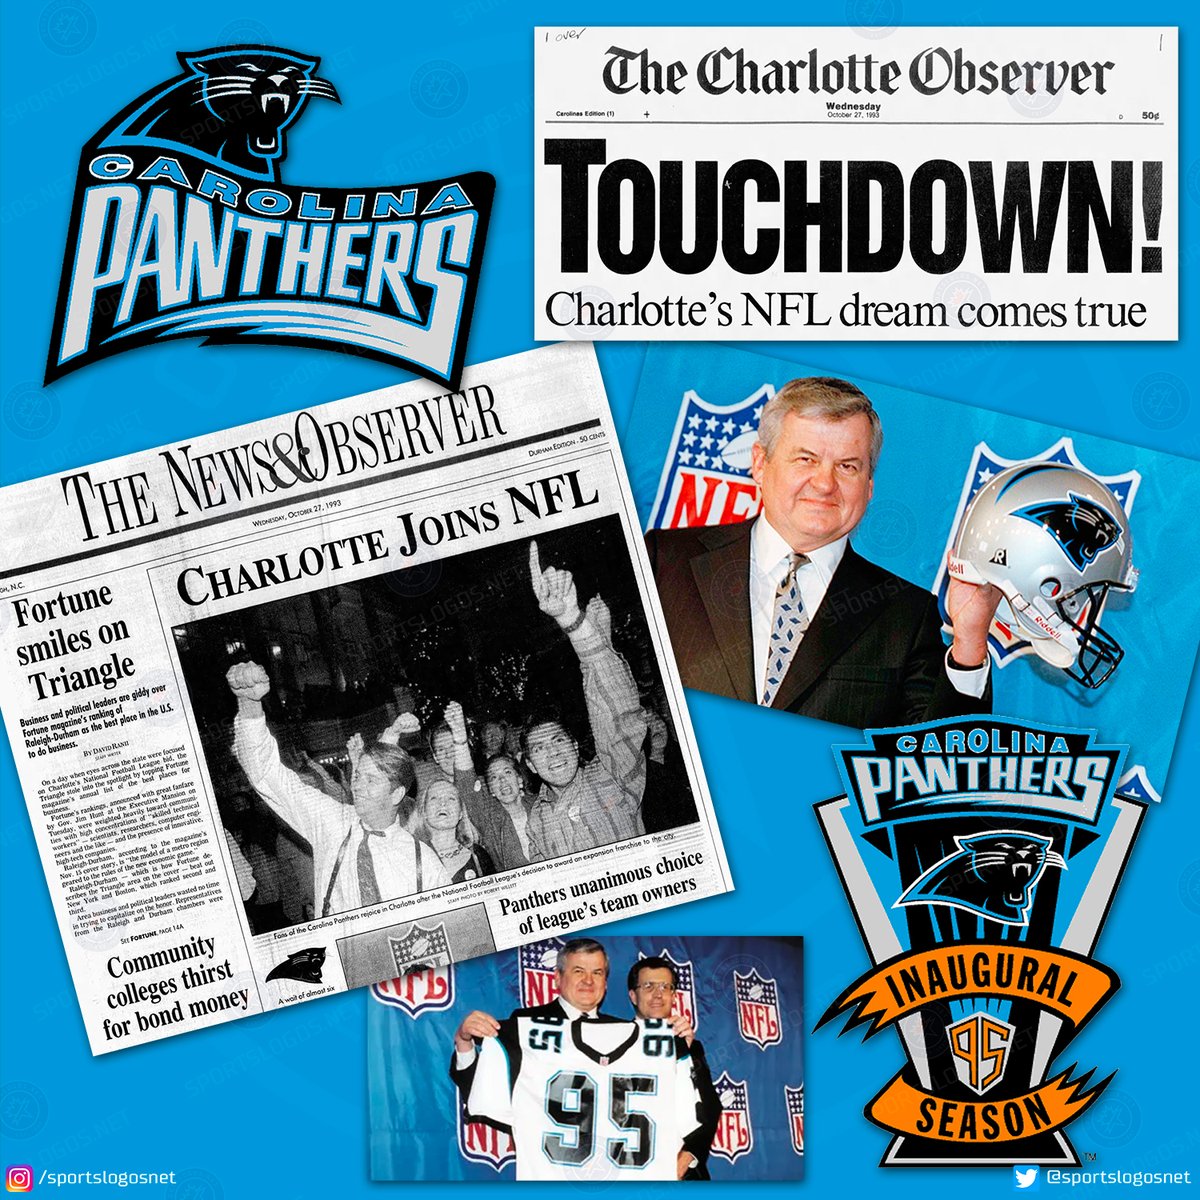 Happy 29th Birthday to the Carolina @Panthers! The NFL awarded an expansion franchise to Charlotte, NC on this day in 1993 #KeepPounding #Panthers #NFL #OnThisDay